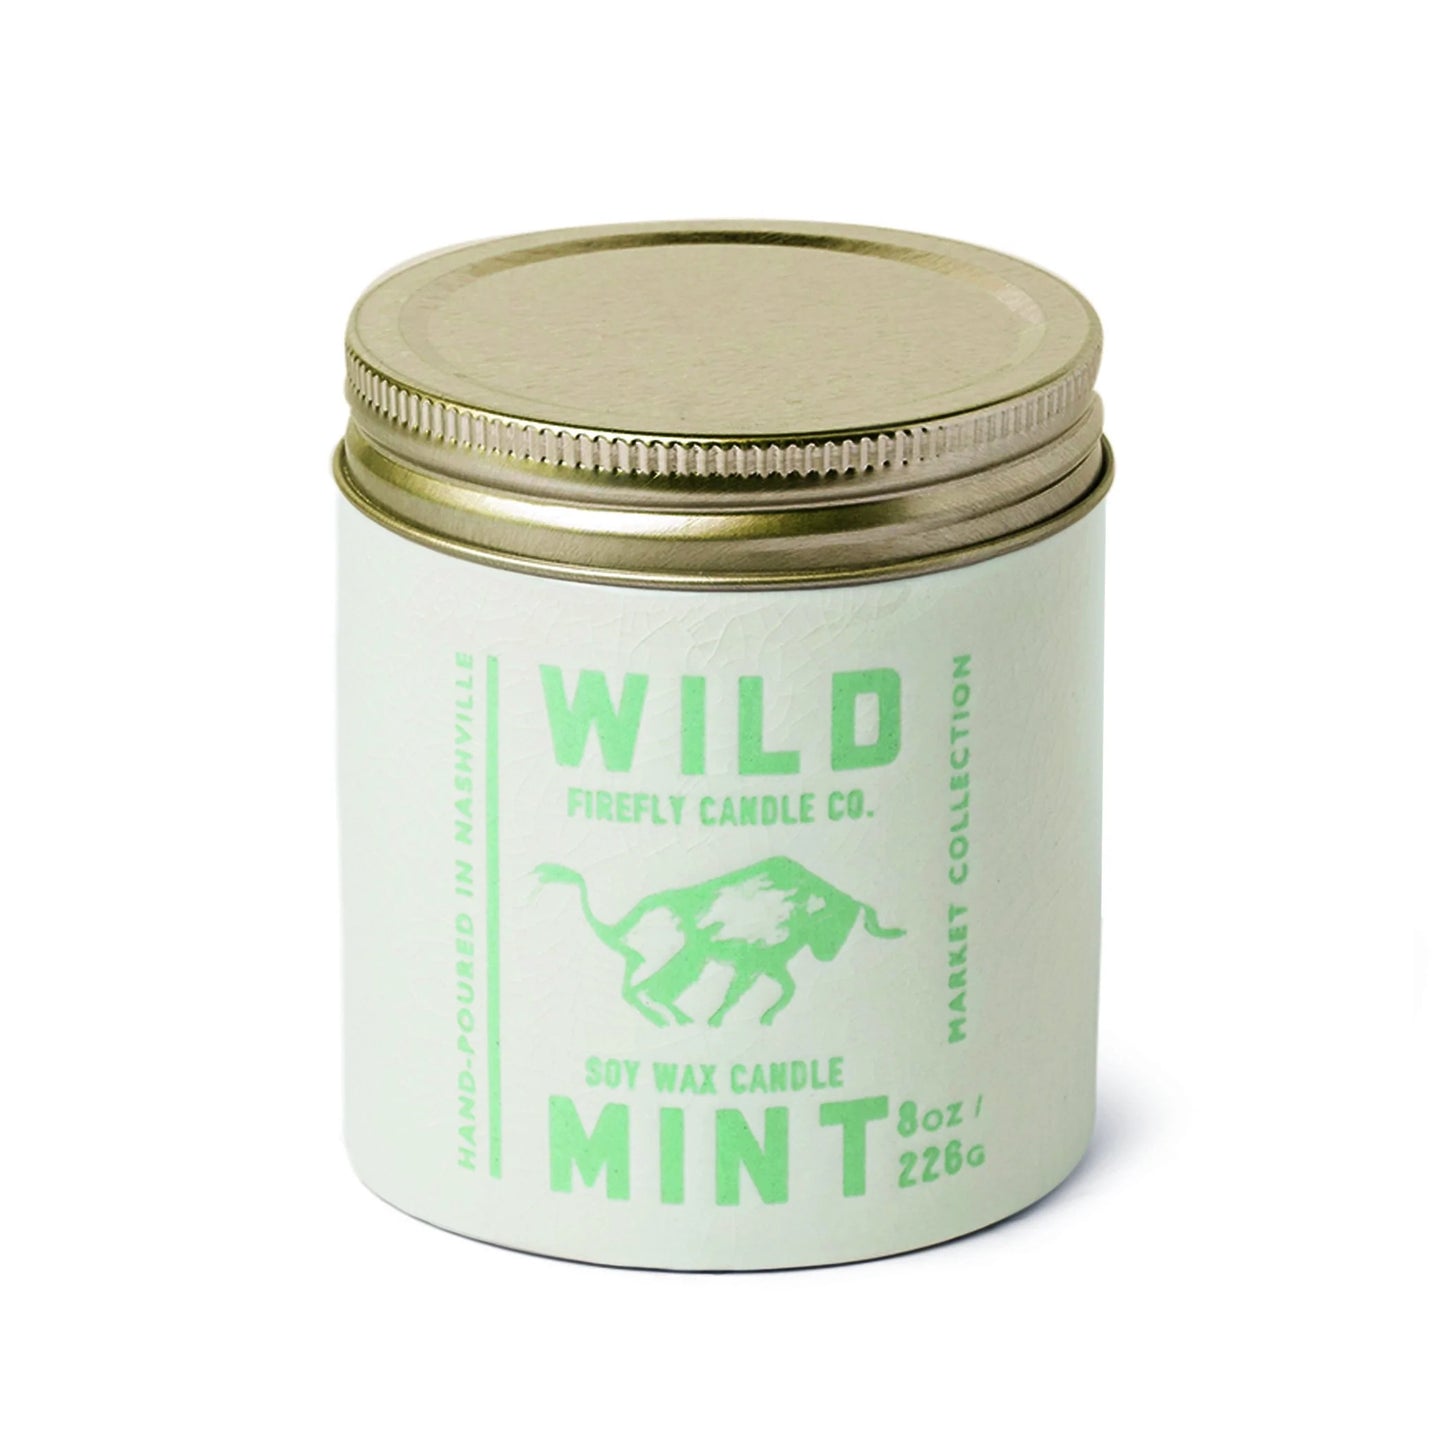 Market 8 oz Candle - Wild Mint - mint colored jar with tin lid